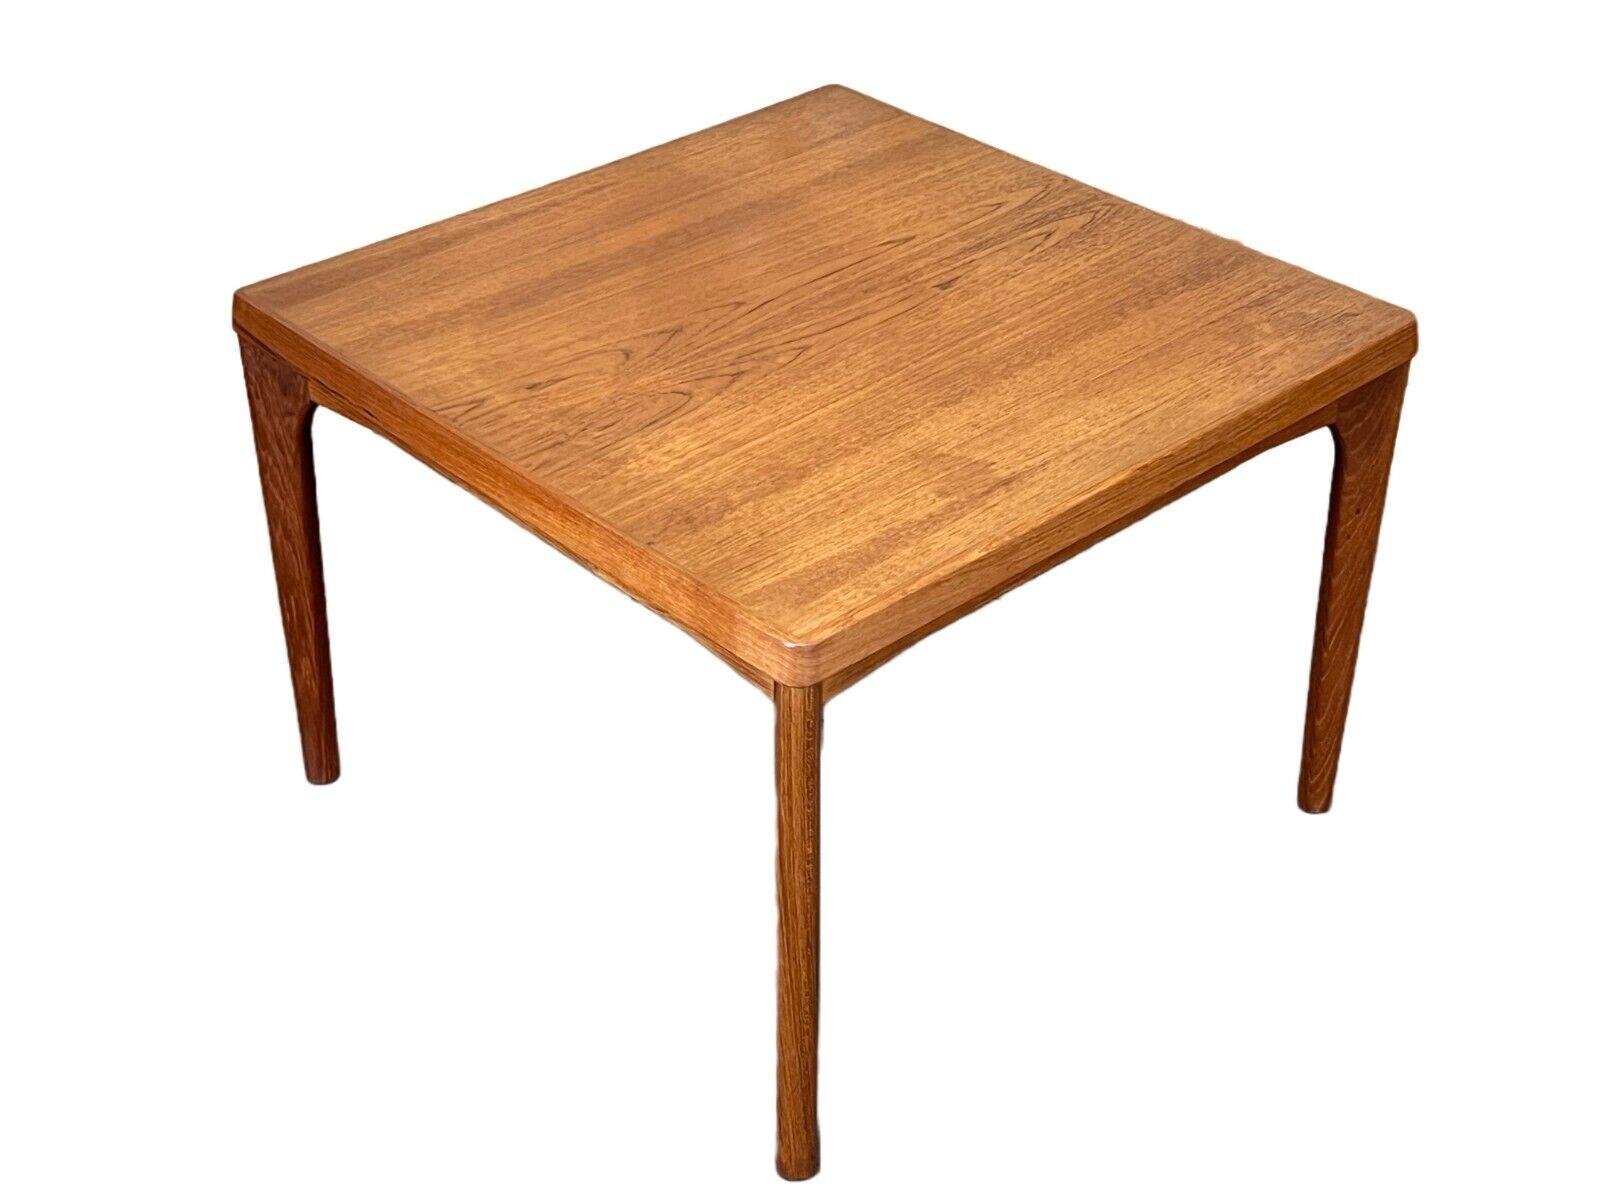 Teak table coffee table side table Henning Kjaernulf design, 1960s-1970s

Object: coffee table / side table

Manufacturer: Henning Kjaernulf

Condition: good

Age: around 1960-1970

Dimensions:

Width = 70cm
Depth = 70cm
Height =